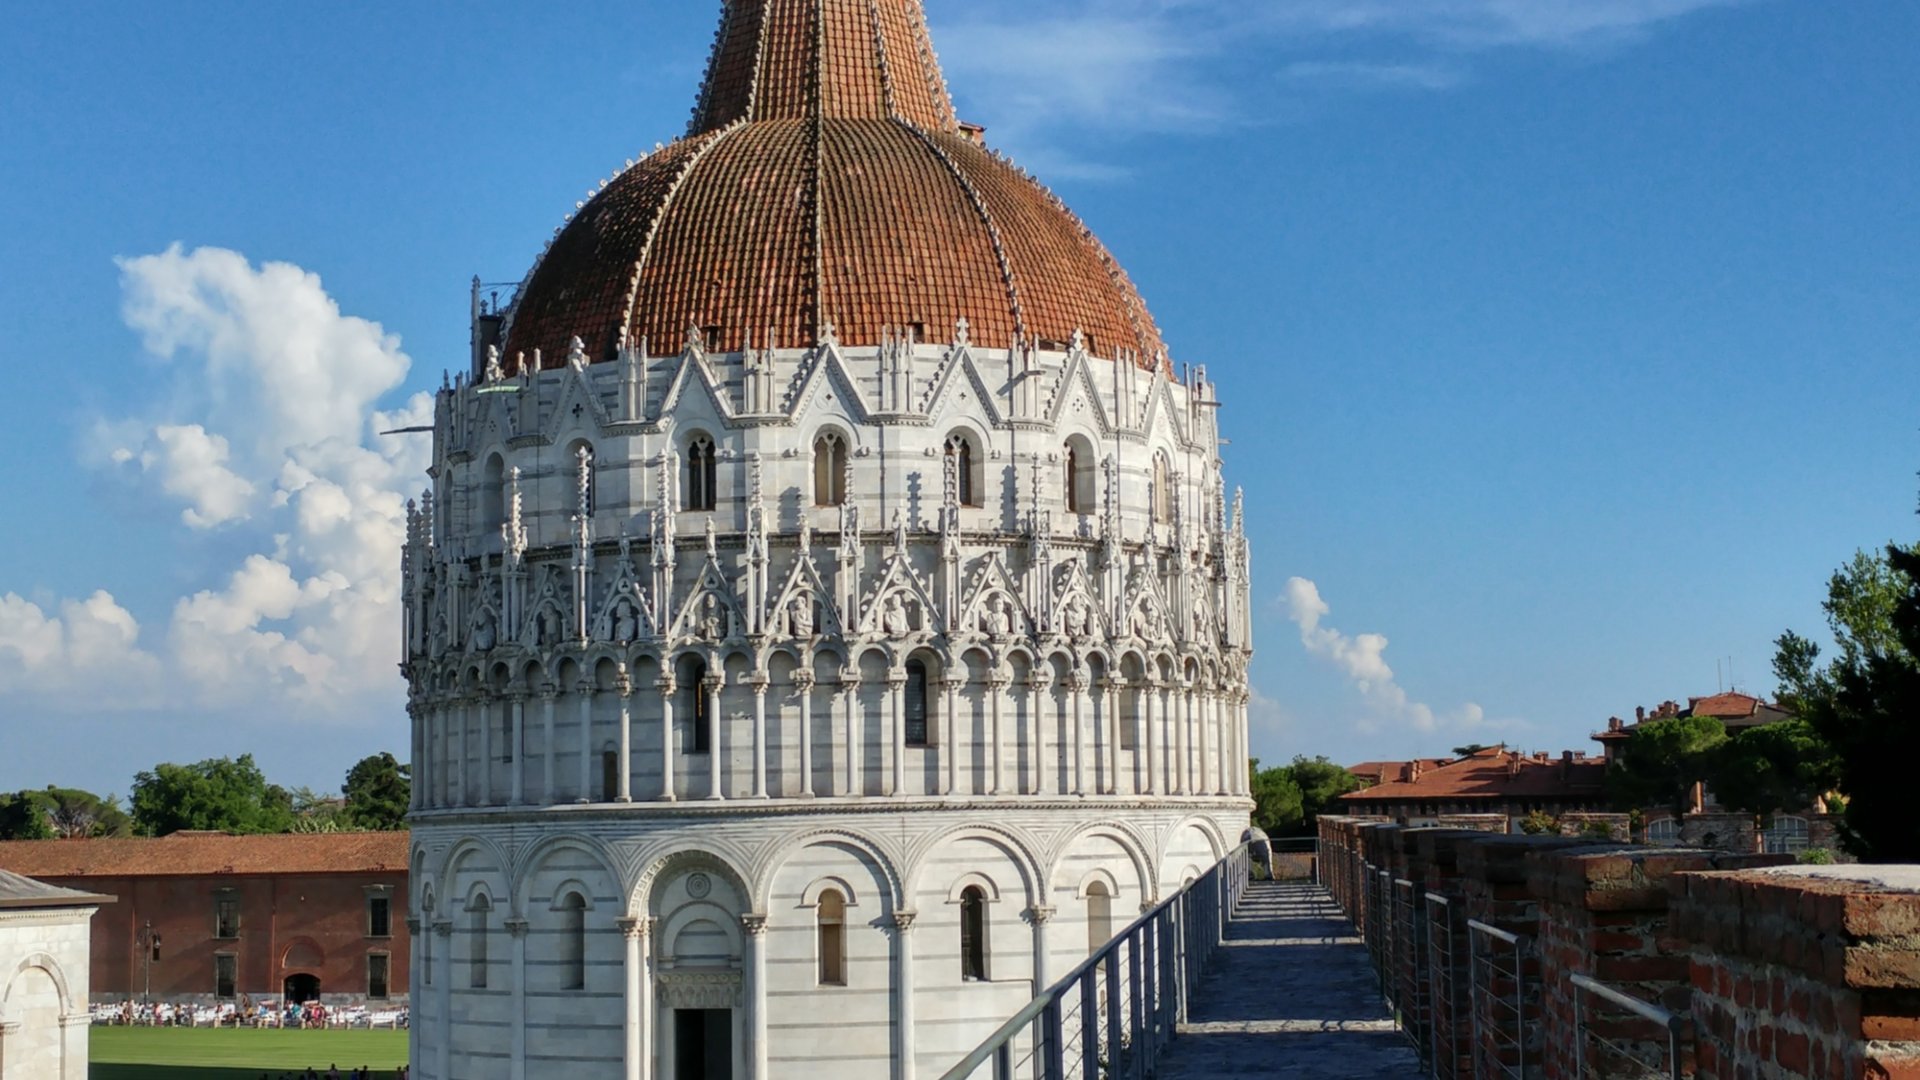 View from the city walls of Pisa